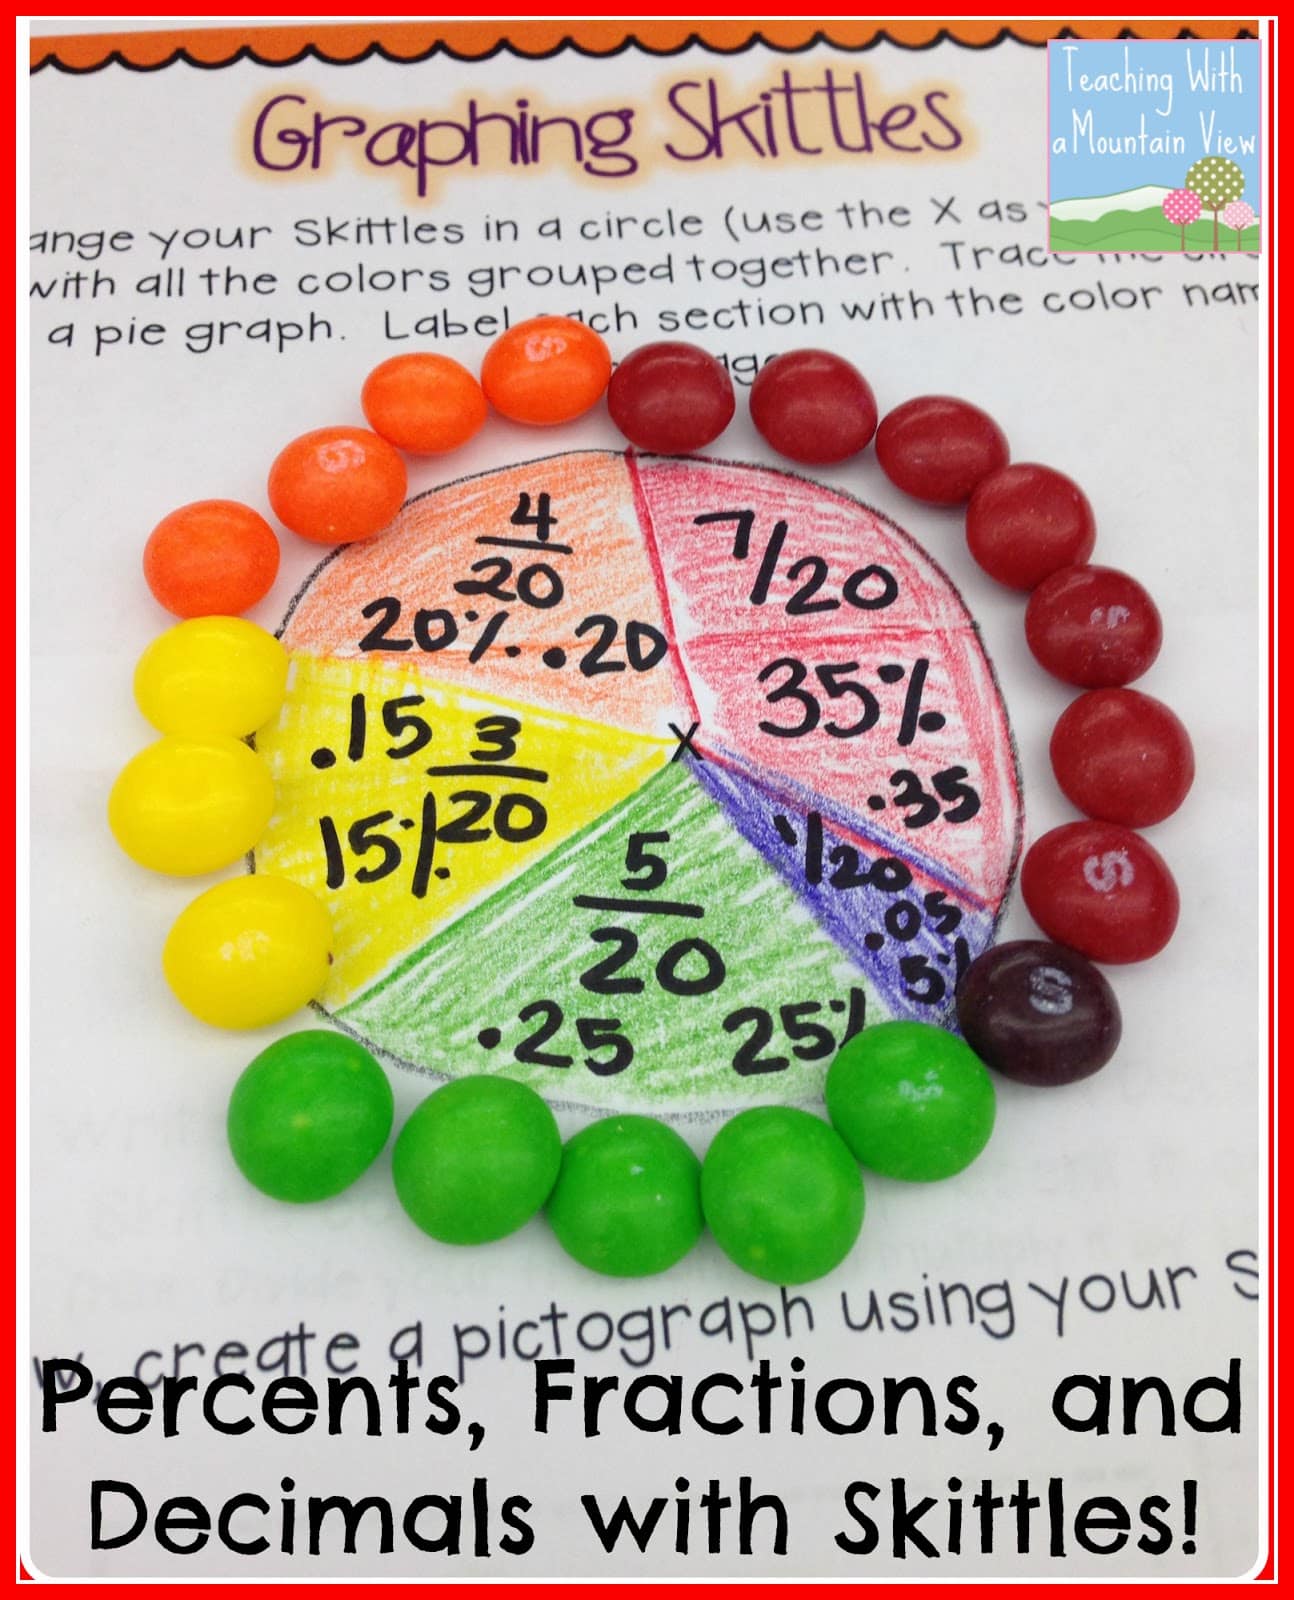 using skittles to teach converting fractions, decimals, and percents